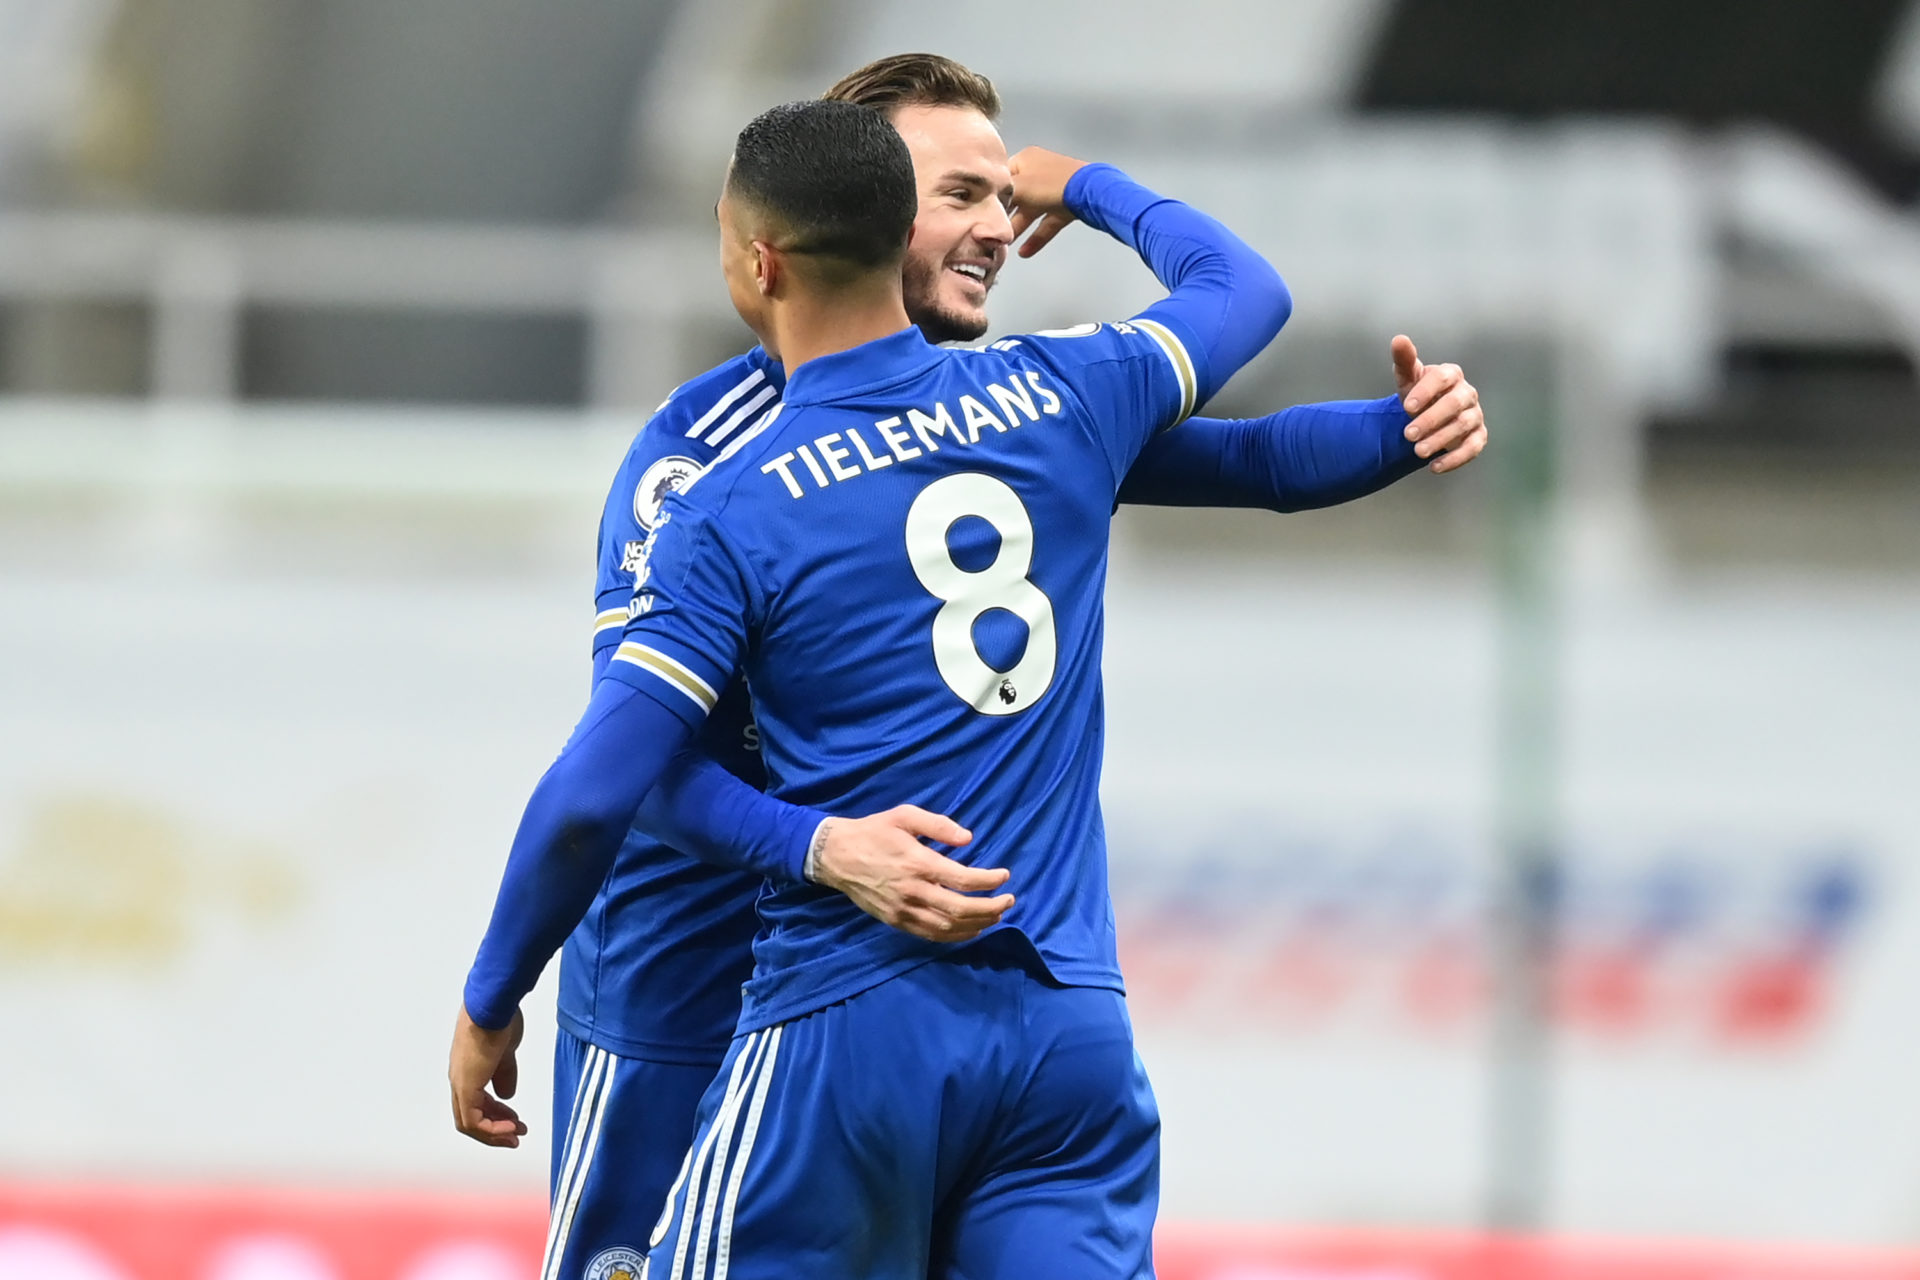 Tottenham told to sign Tielemans and Maddison